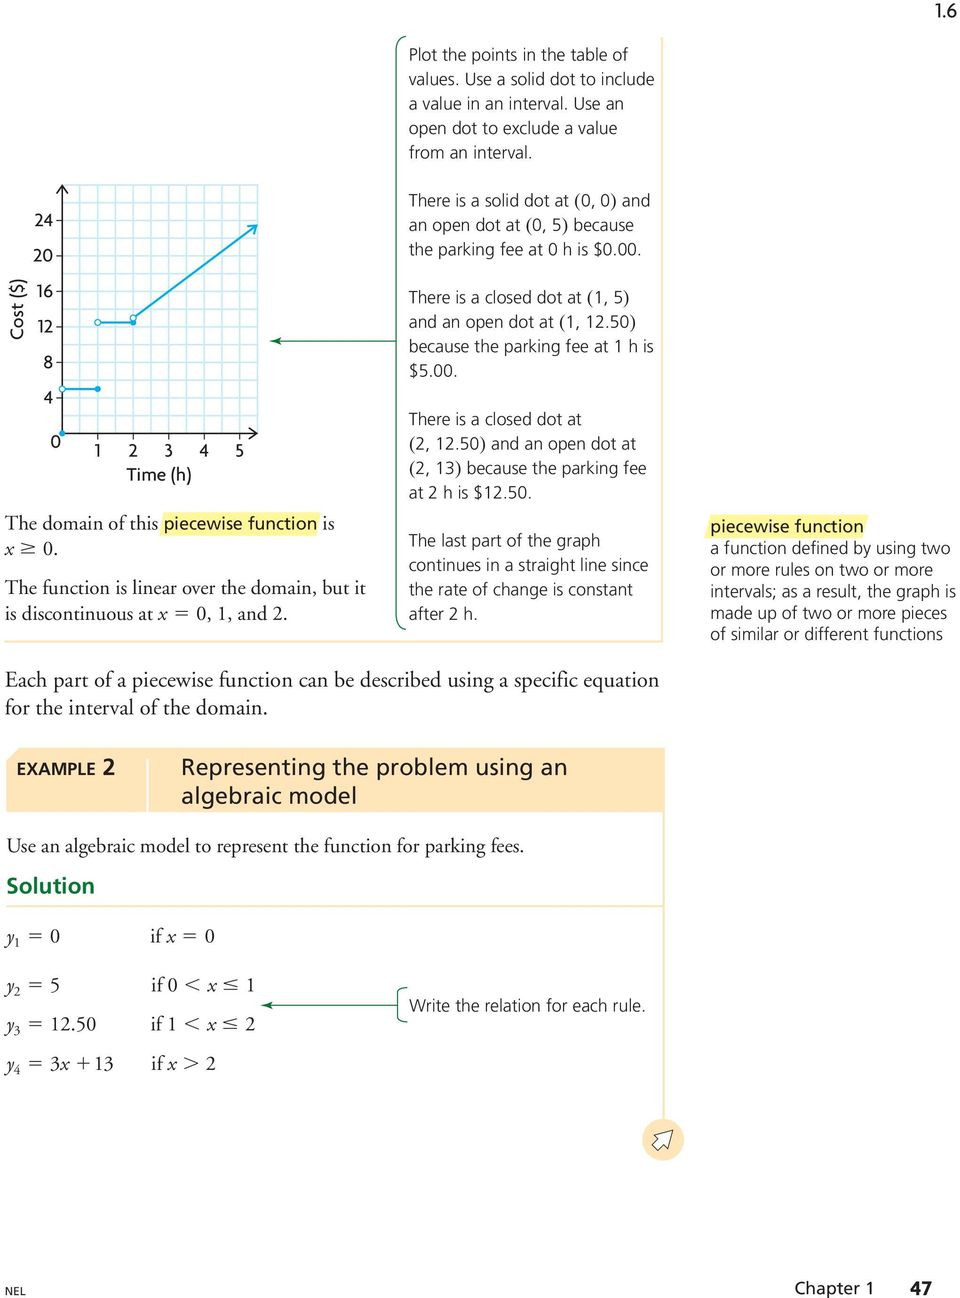 Worksheet Piecewise Functions Algebra 2 1 6 Piecewise Functions Learn About the Math Representing